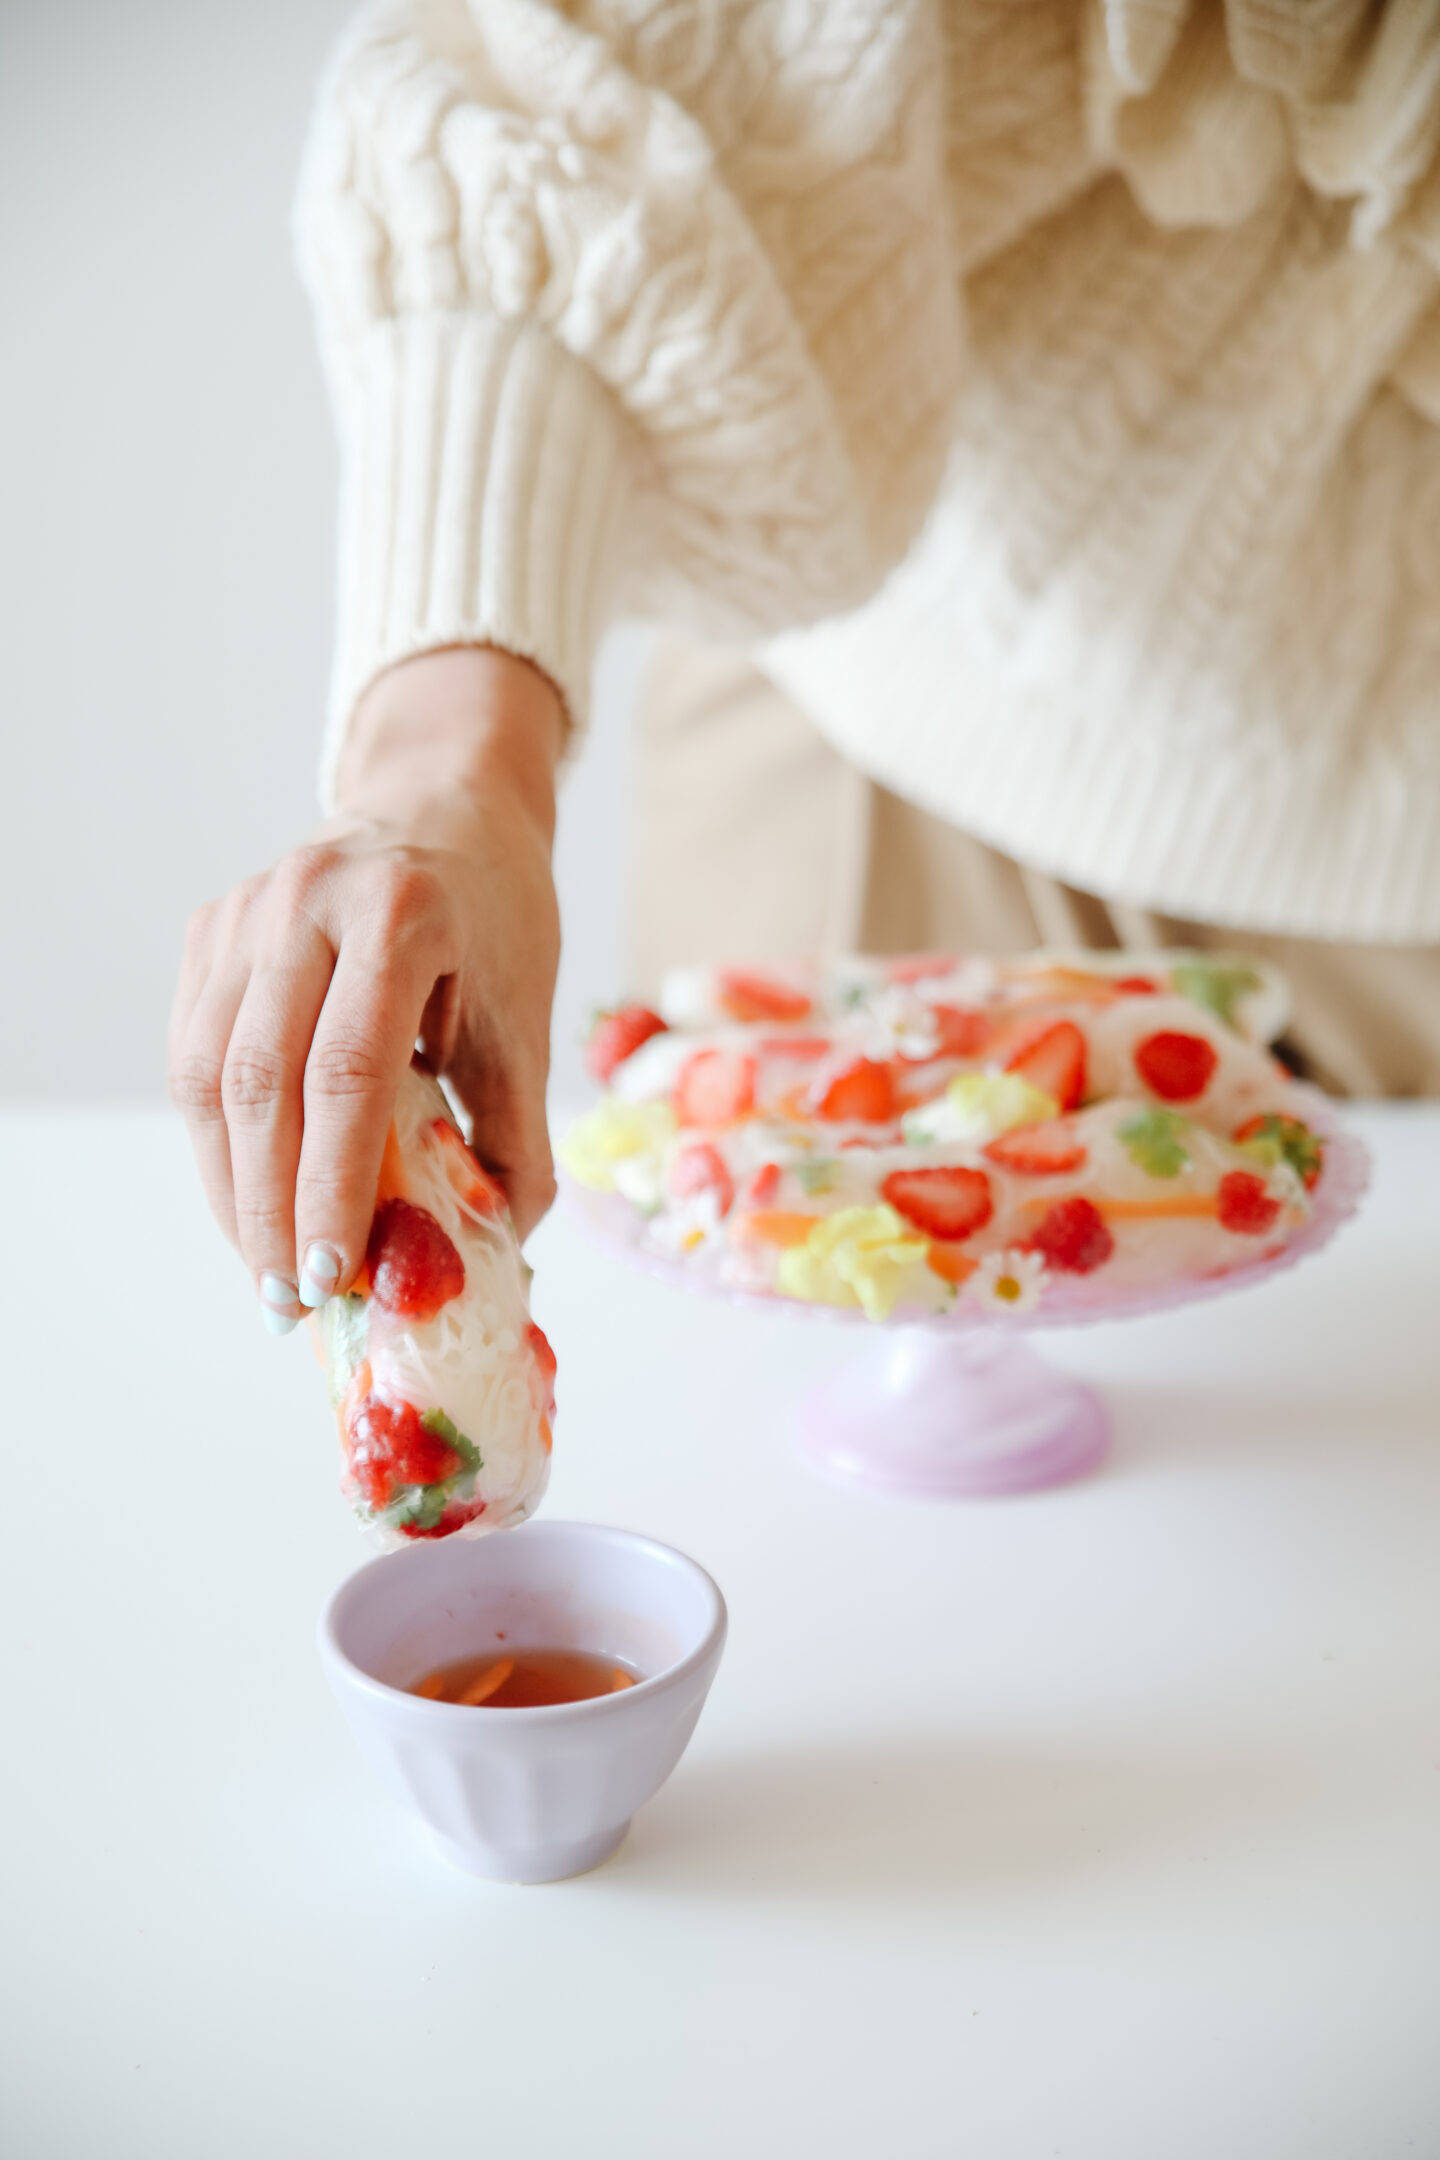 Let's Make These Adorable Fresh Strawberry Spring Rolls!